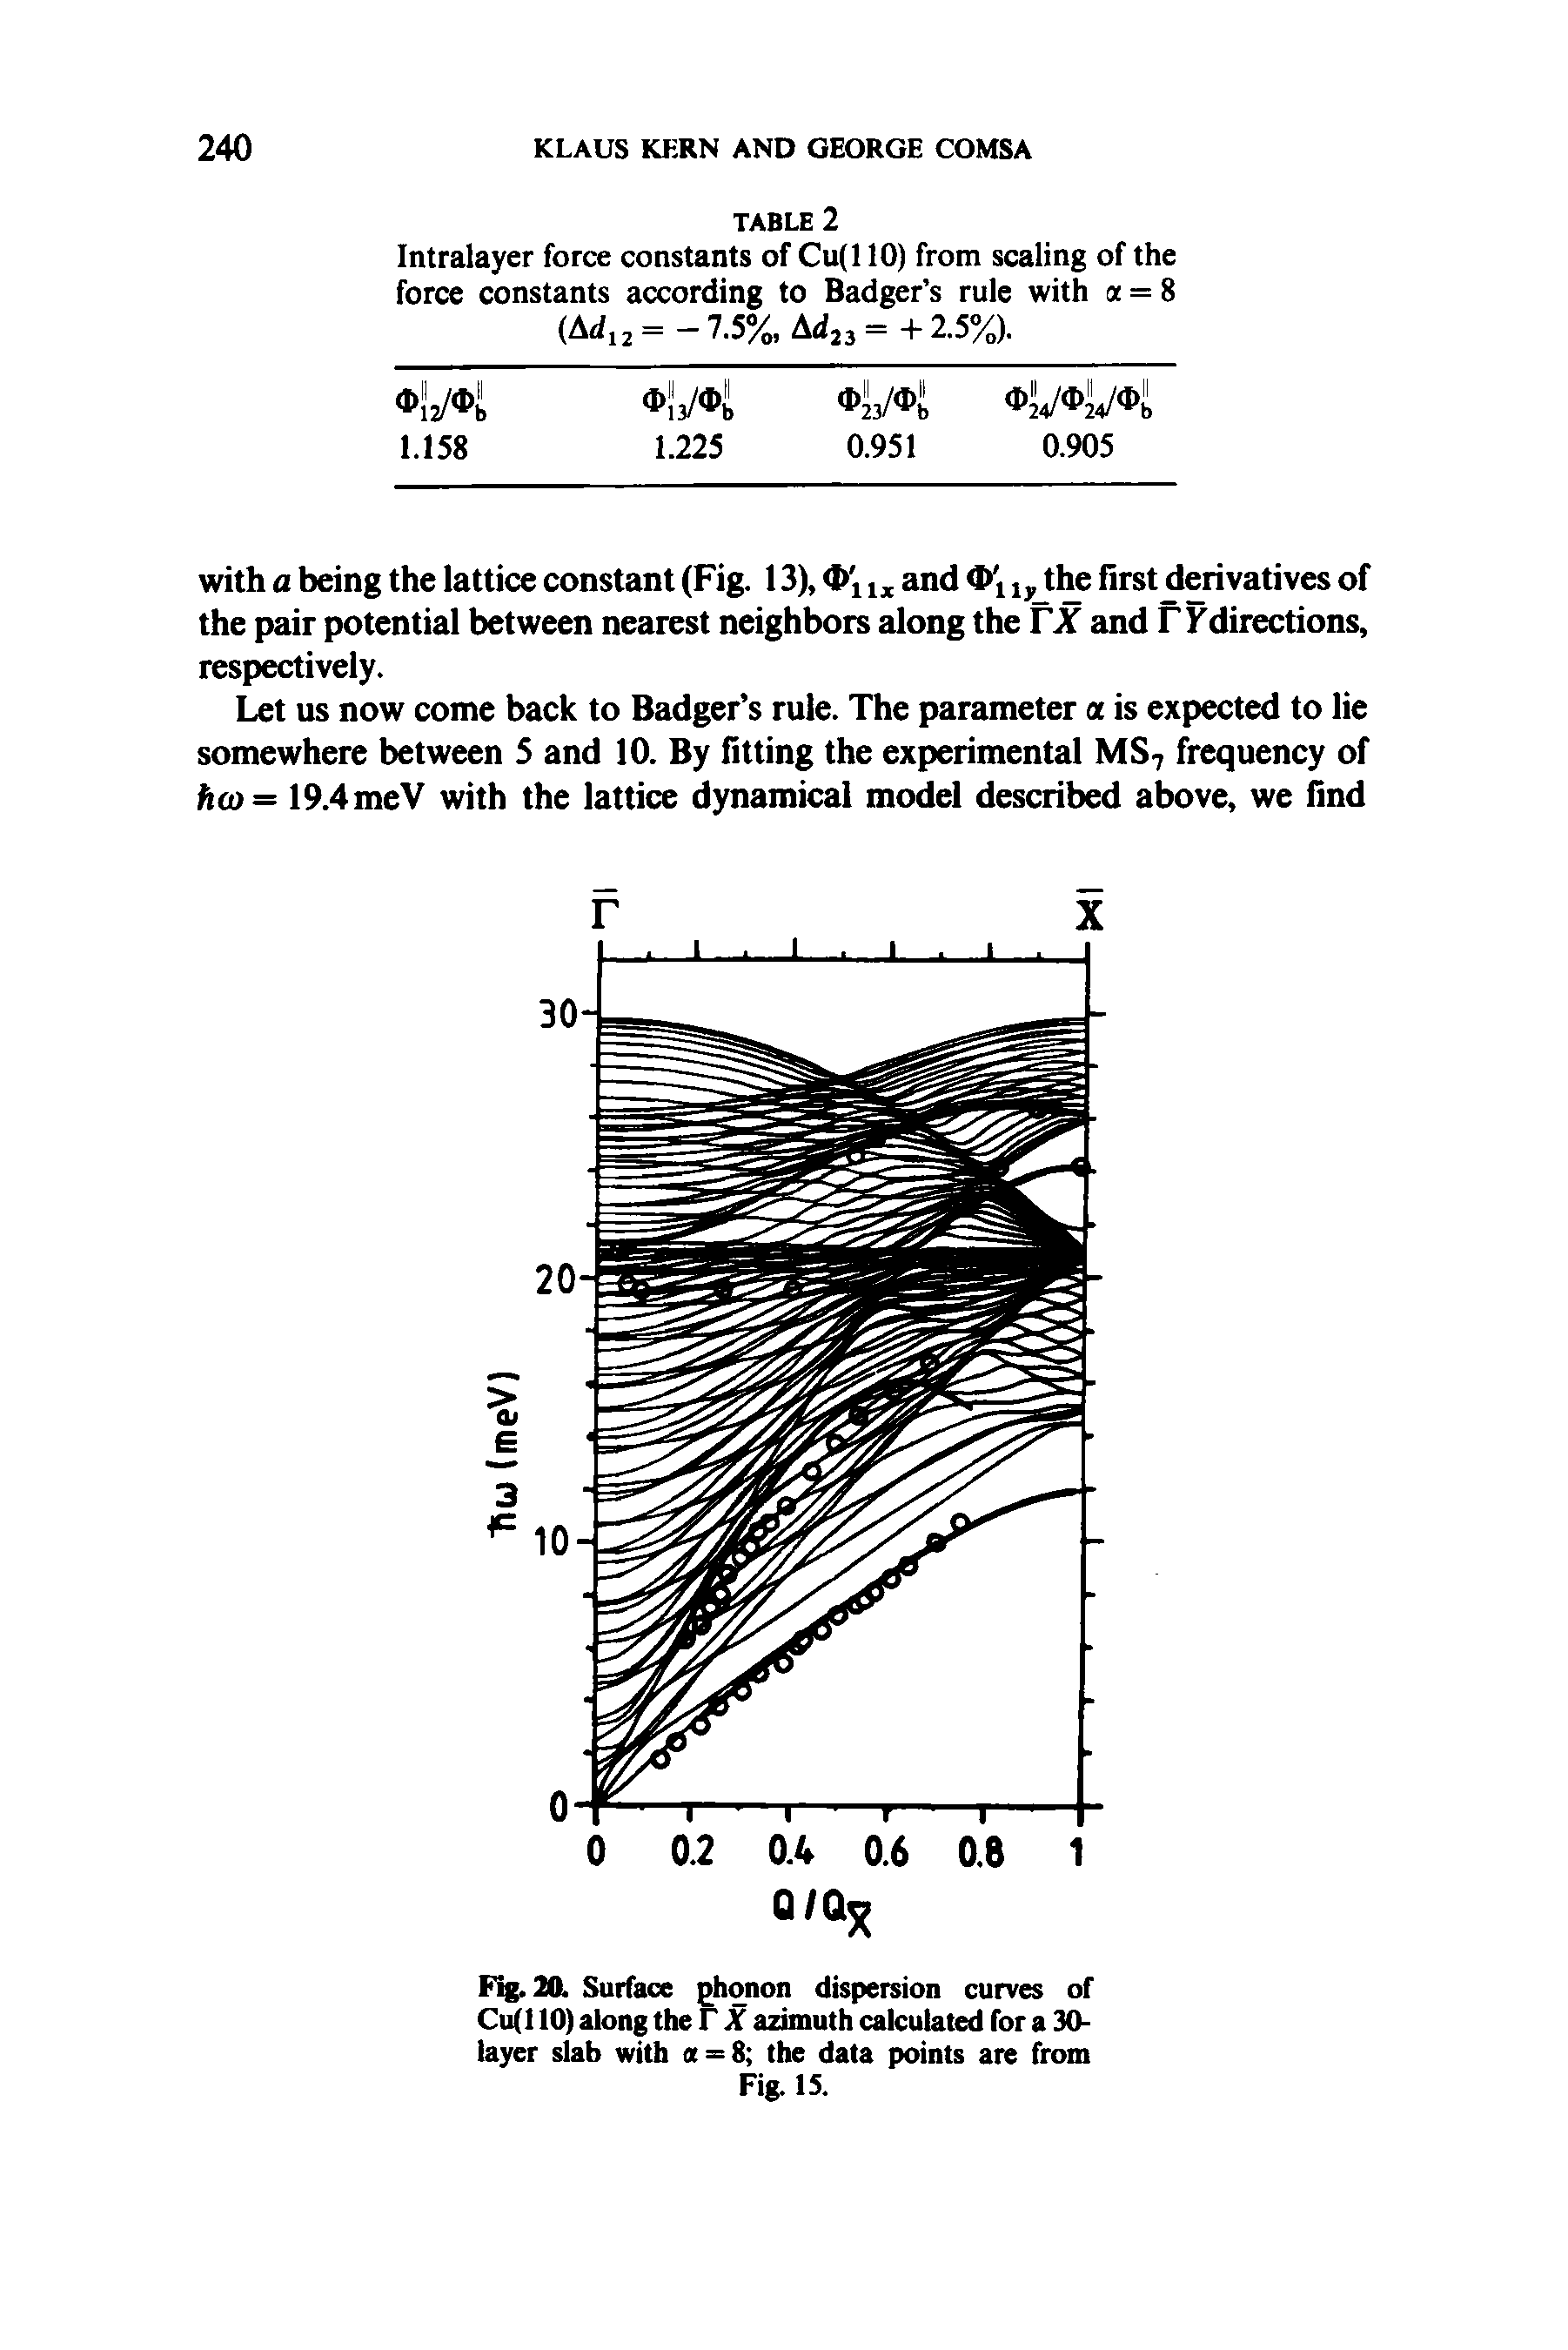 Fig. 20. Surface ghonon dispersion curves of Cu(l 10) along the F X azimuth calculated for a 30-tayer slab with a = 8 the data points are from Fig. 15.